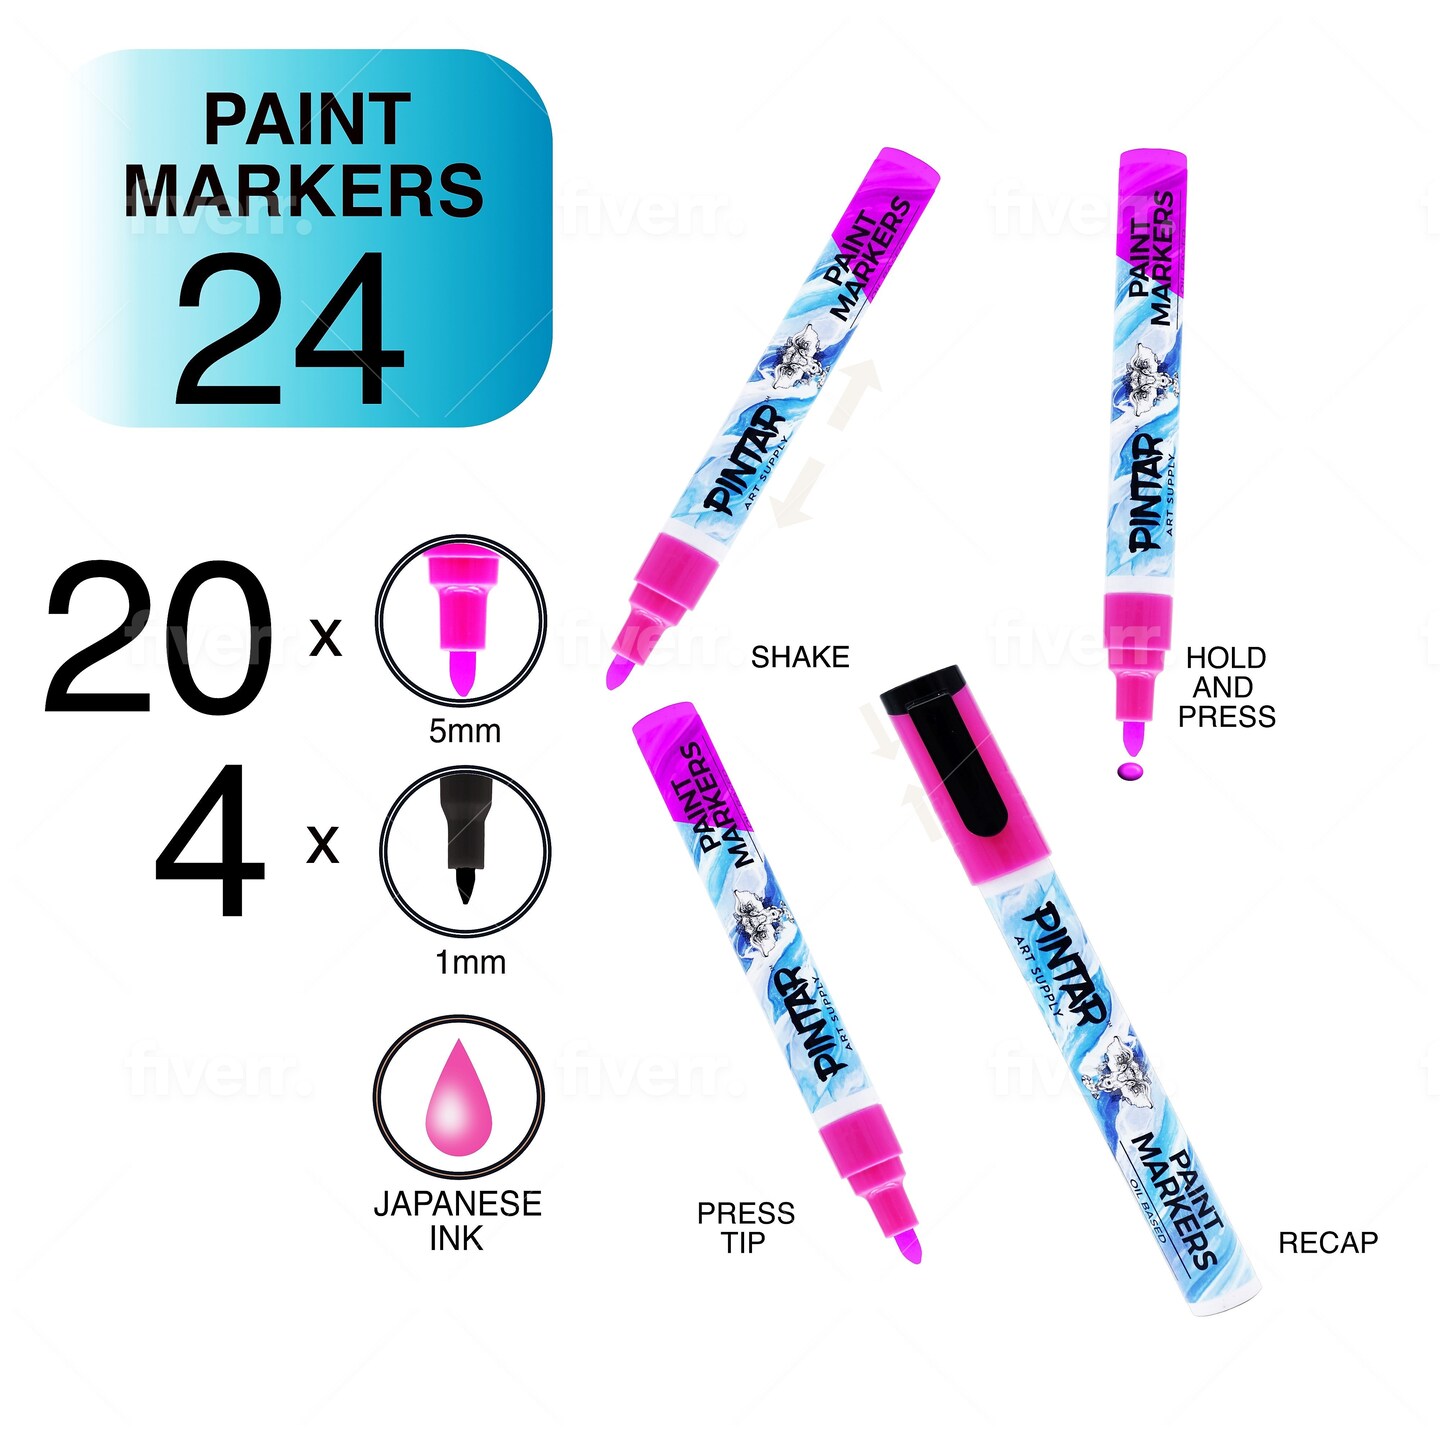 Pintar Oil Based Paint Markers - 24 Pack with 20 (5 mm Tips) &#x26; 4 (1 mm Tips)